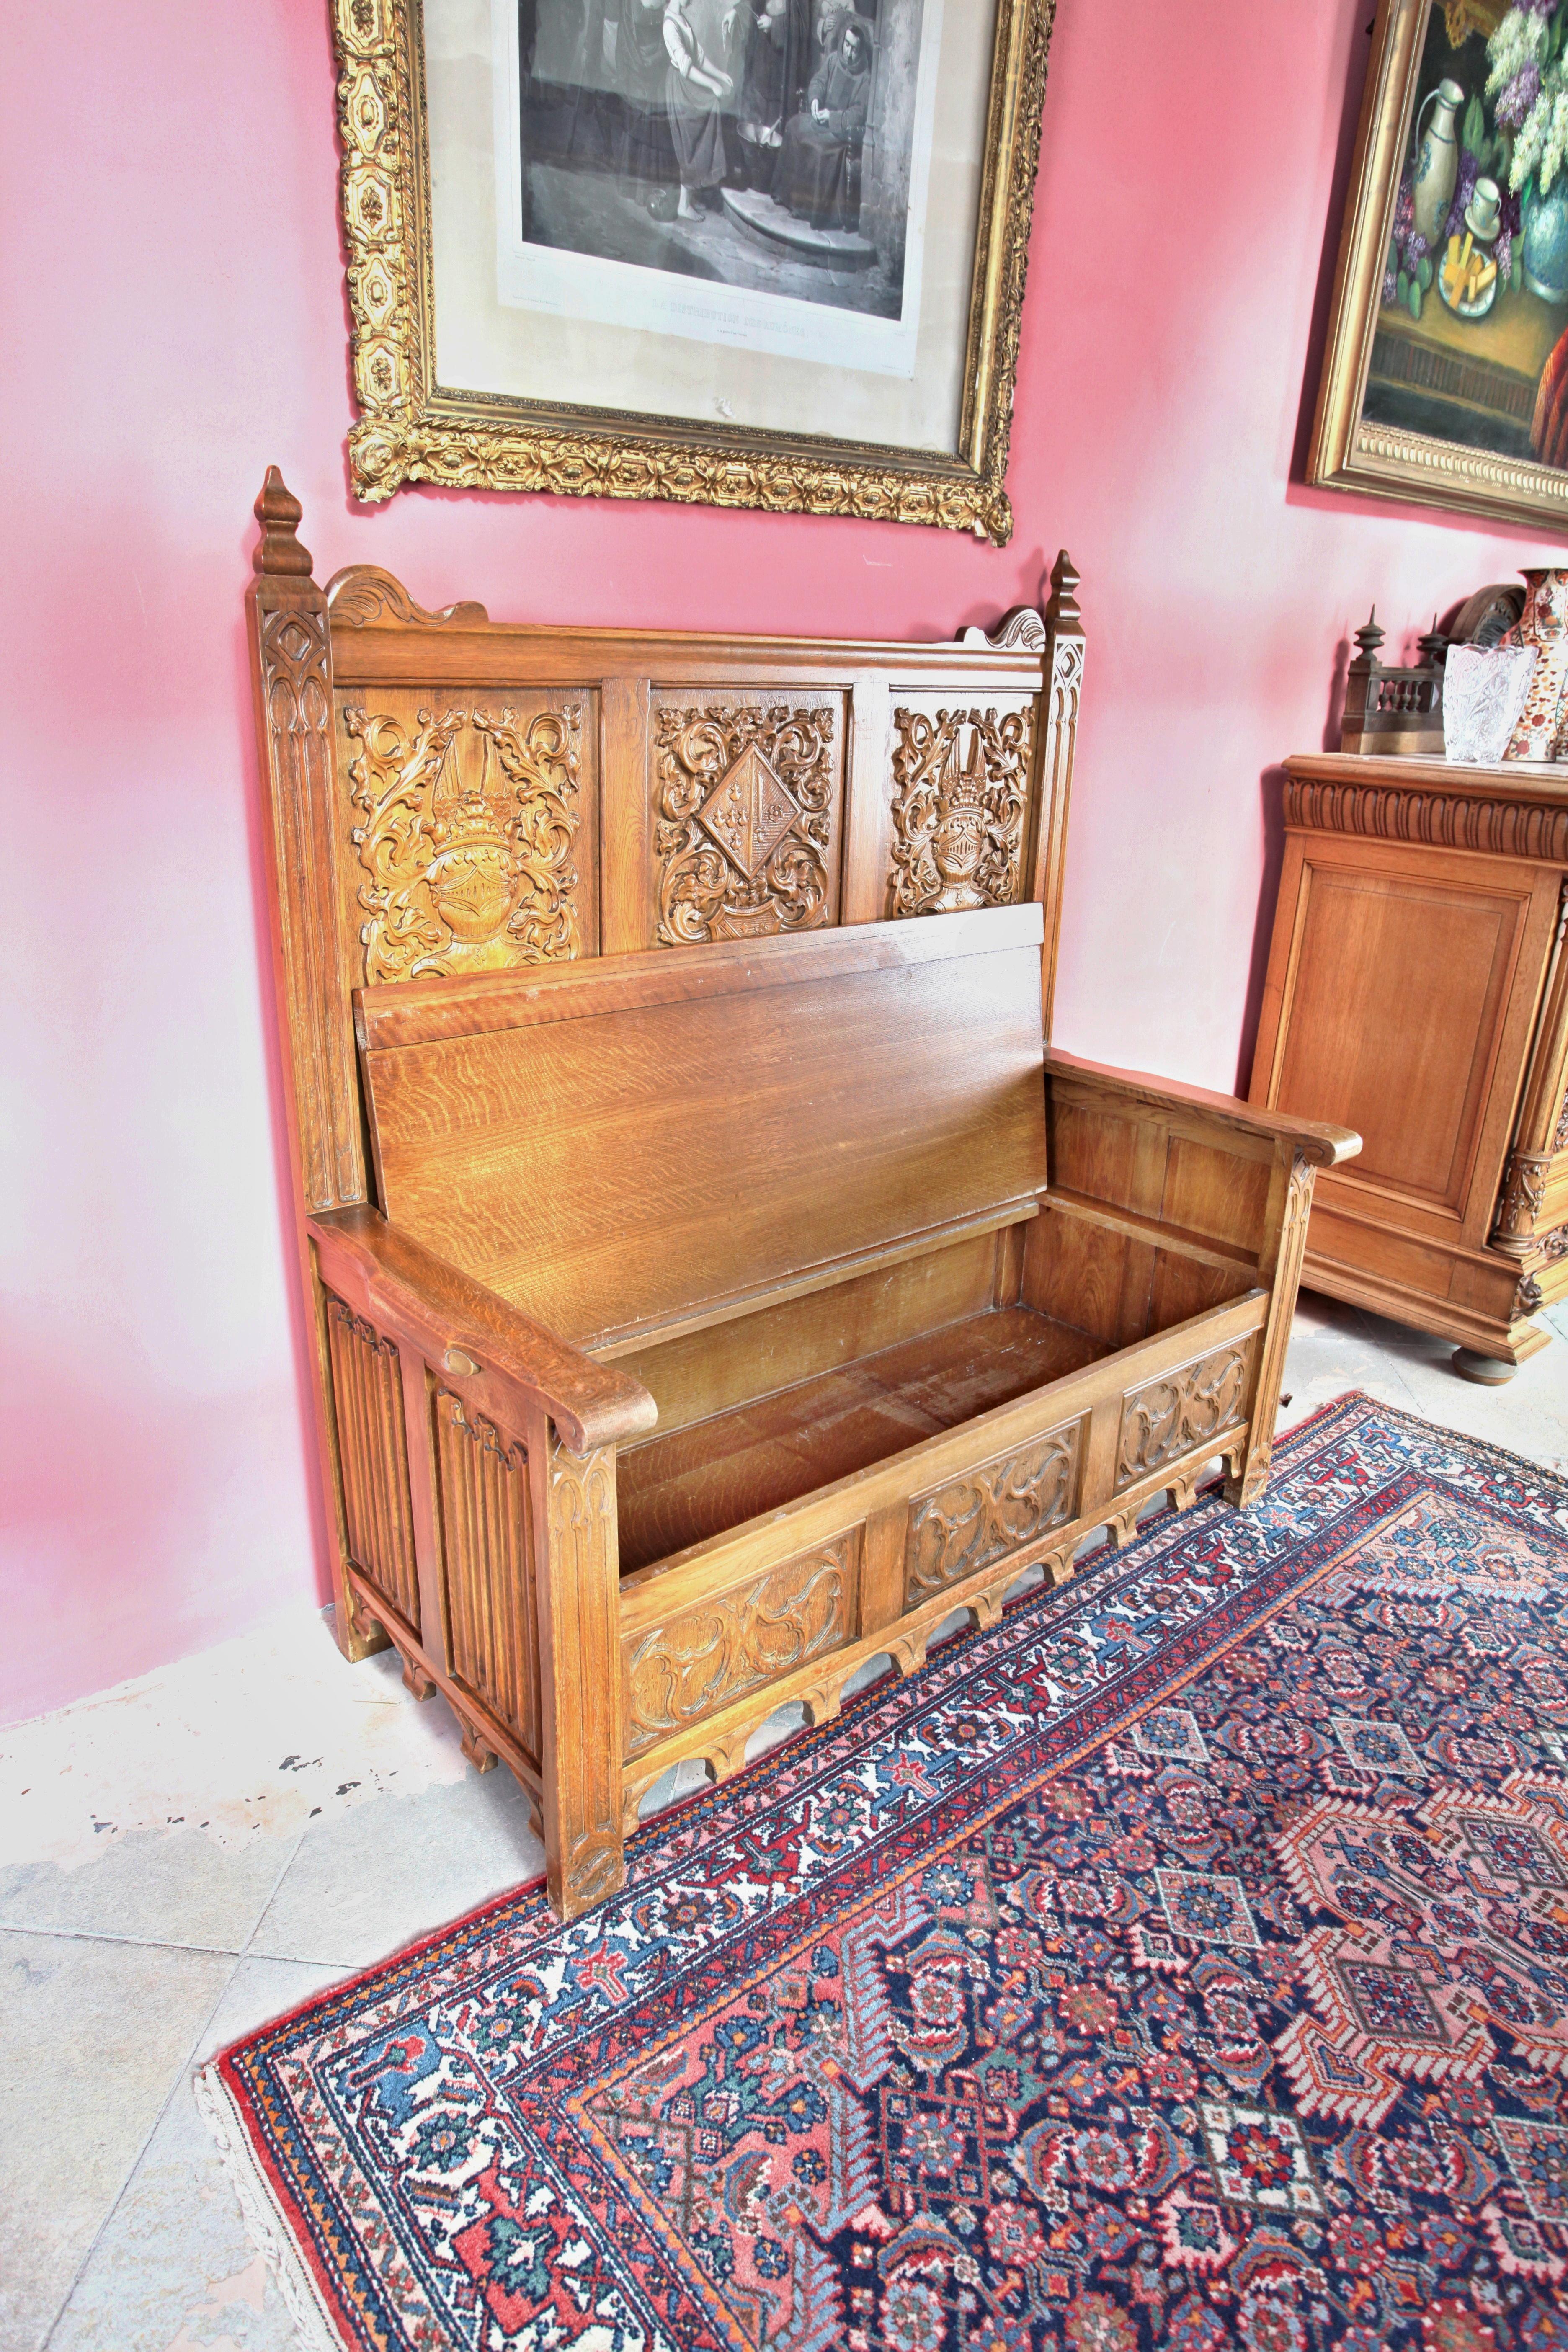 A solid oak bench richly decorated with hand-carved Gothic style. There is storage space inside the bench. There is an organ pattern on the sides and the frontal coffered panels are carved with a floral motif surrounding the coats of arms.